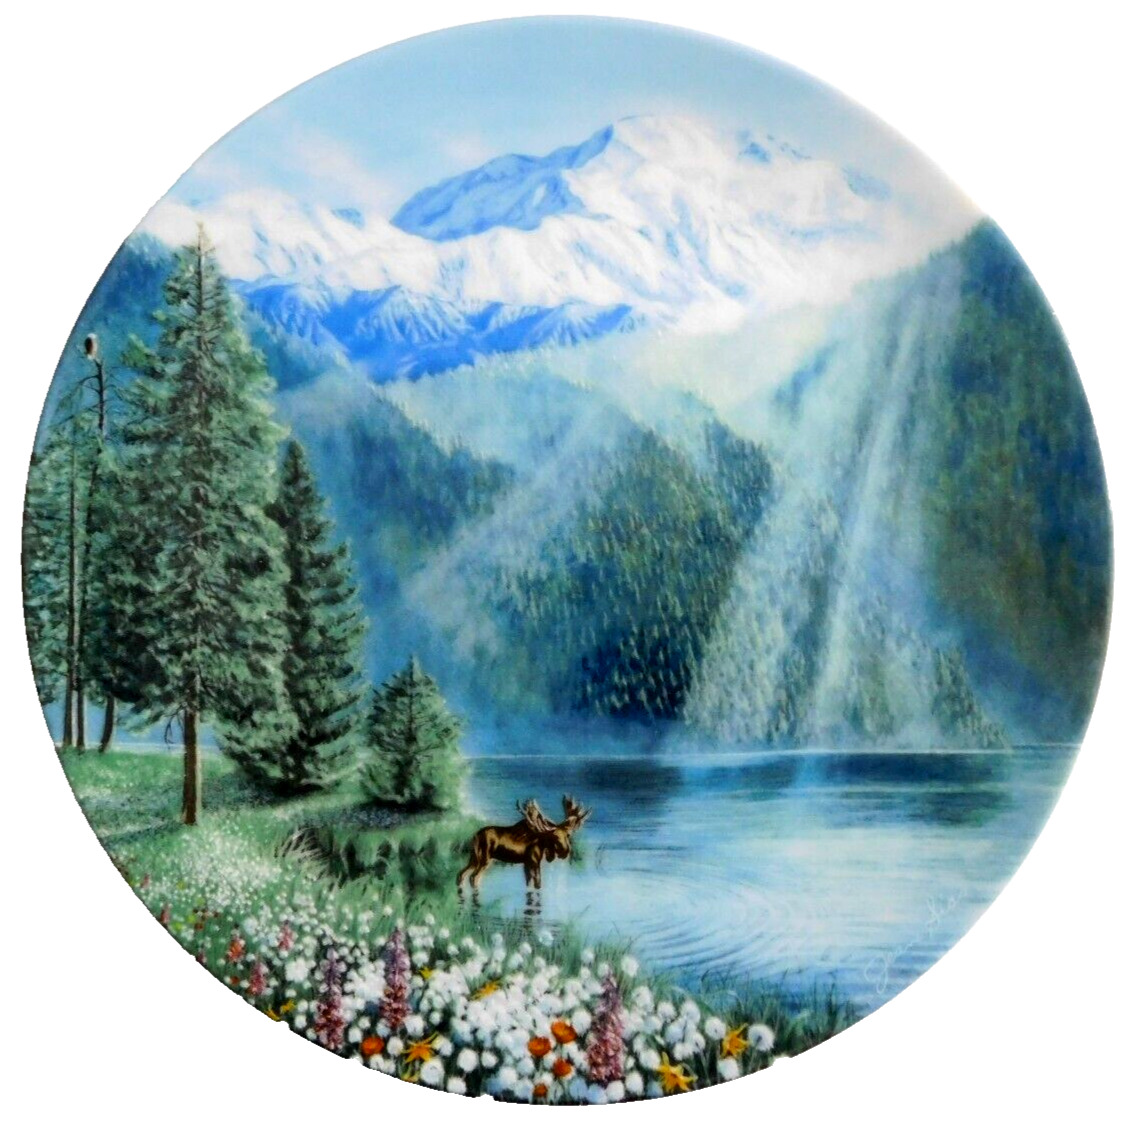 W.S. George North American Landmarks Plate Misty Morning at Mount McKinley 1991